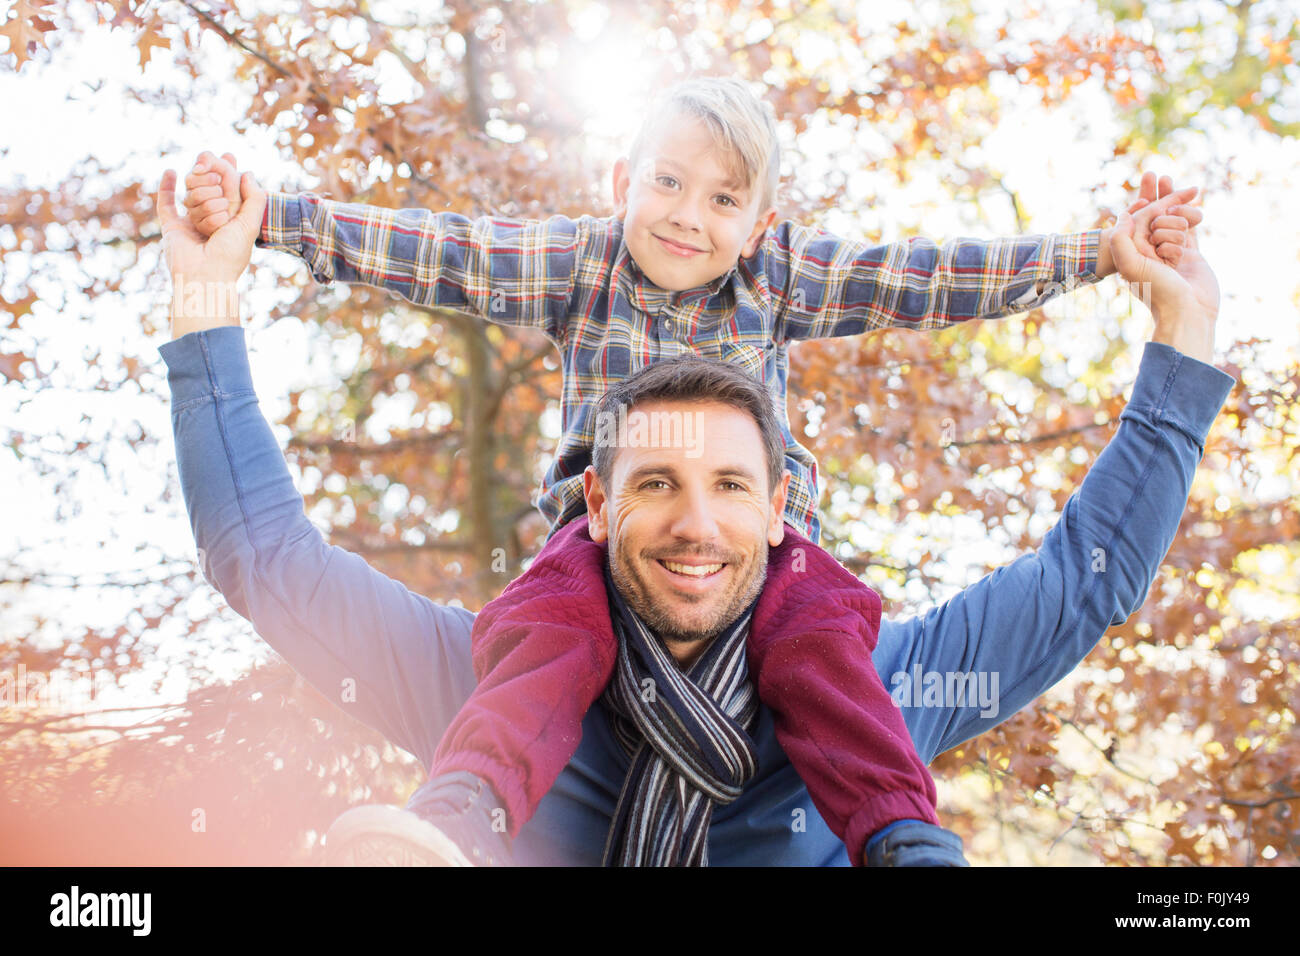 Portrait smiling father carrying son on shoulders below autumn leaves Stock Photo